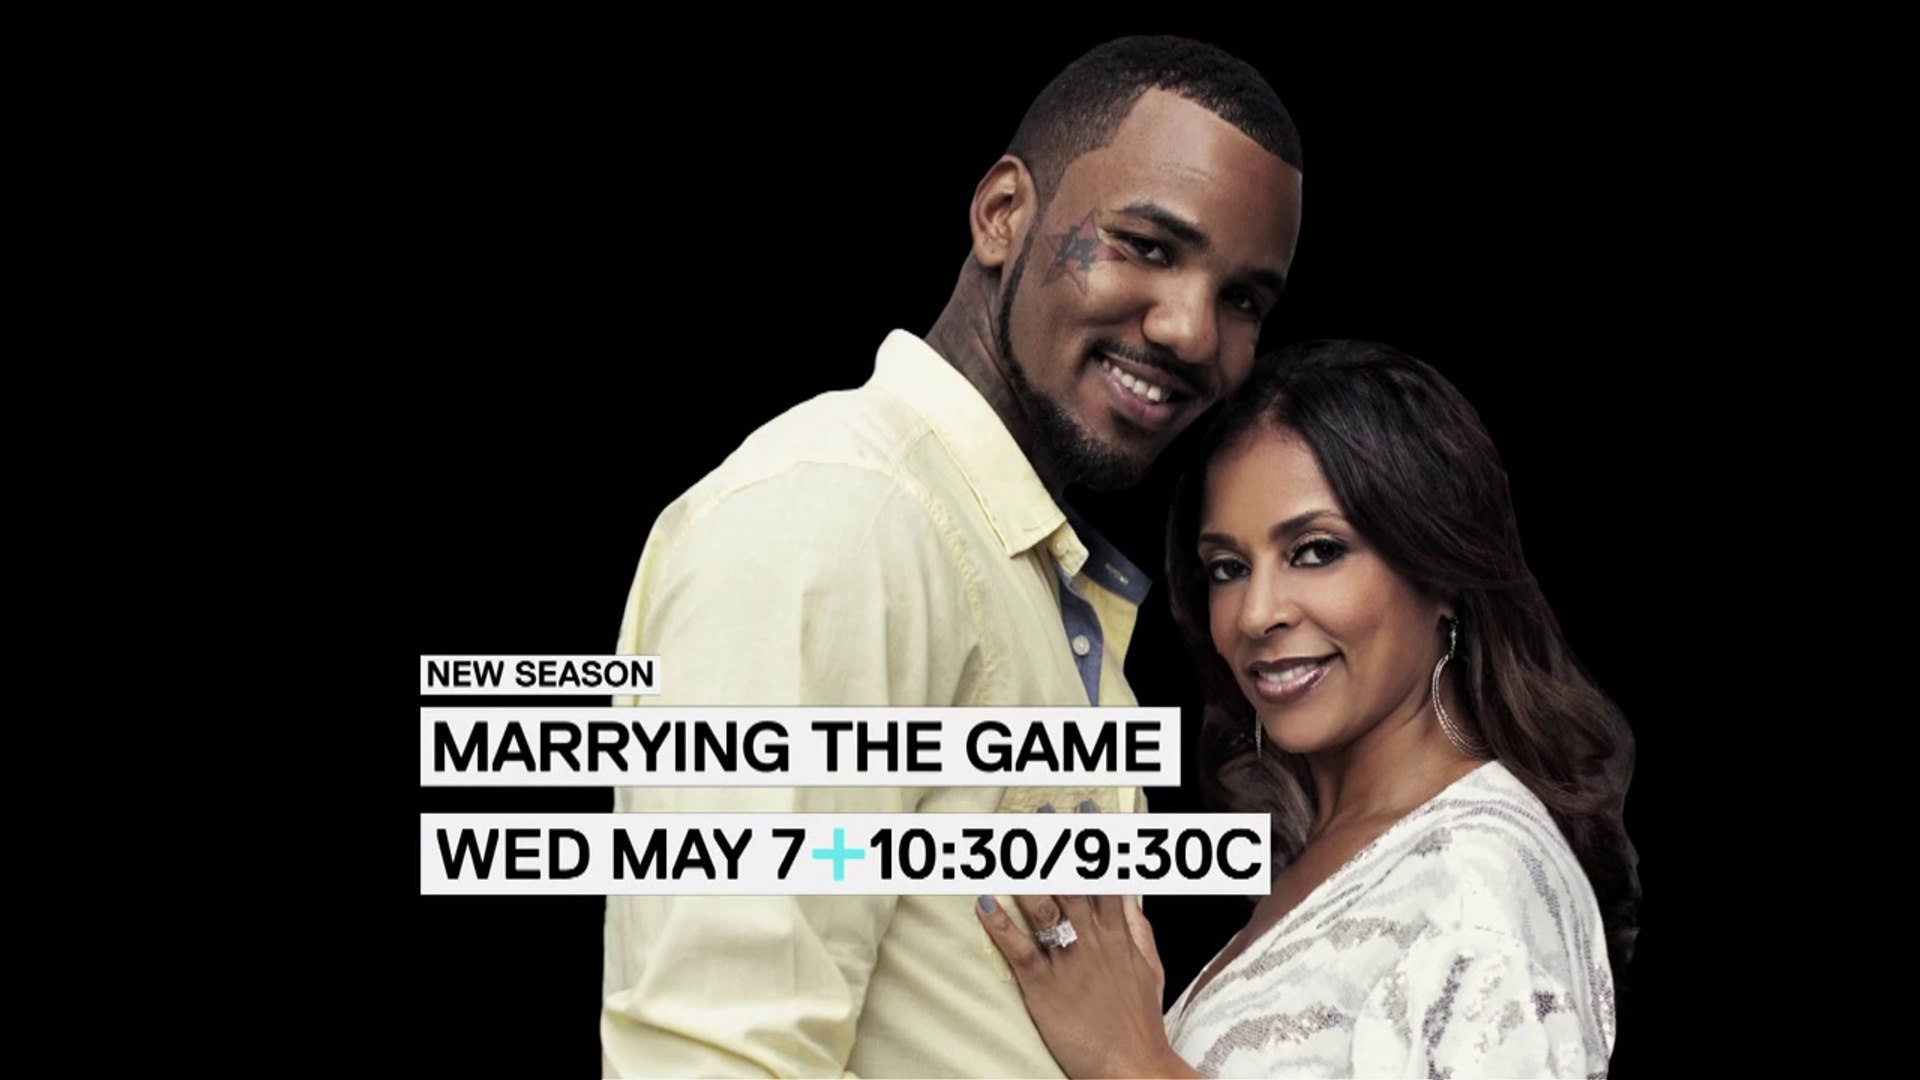 Game to Star in VH1 Reality Show 'Marrying the Game